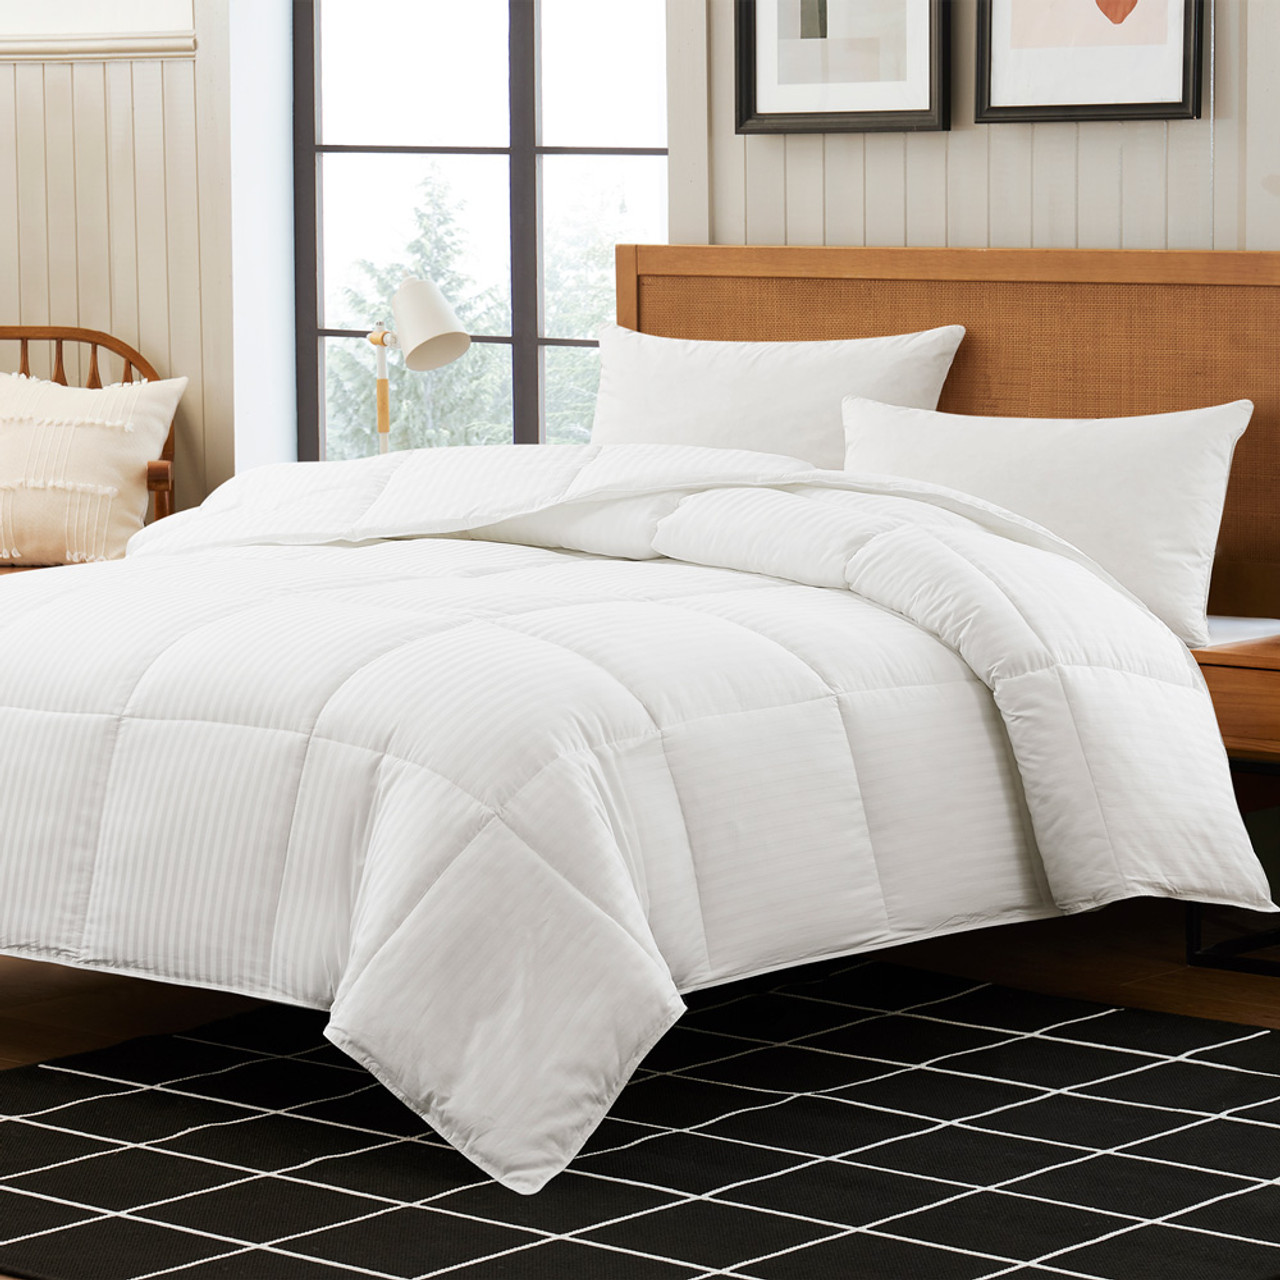 Bring Your Favorite Hotel Bedding Home - Dwell